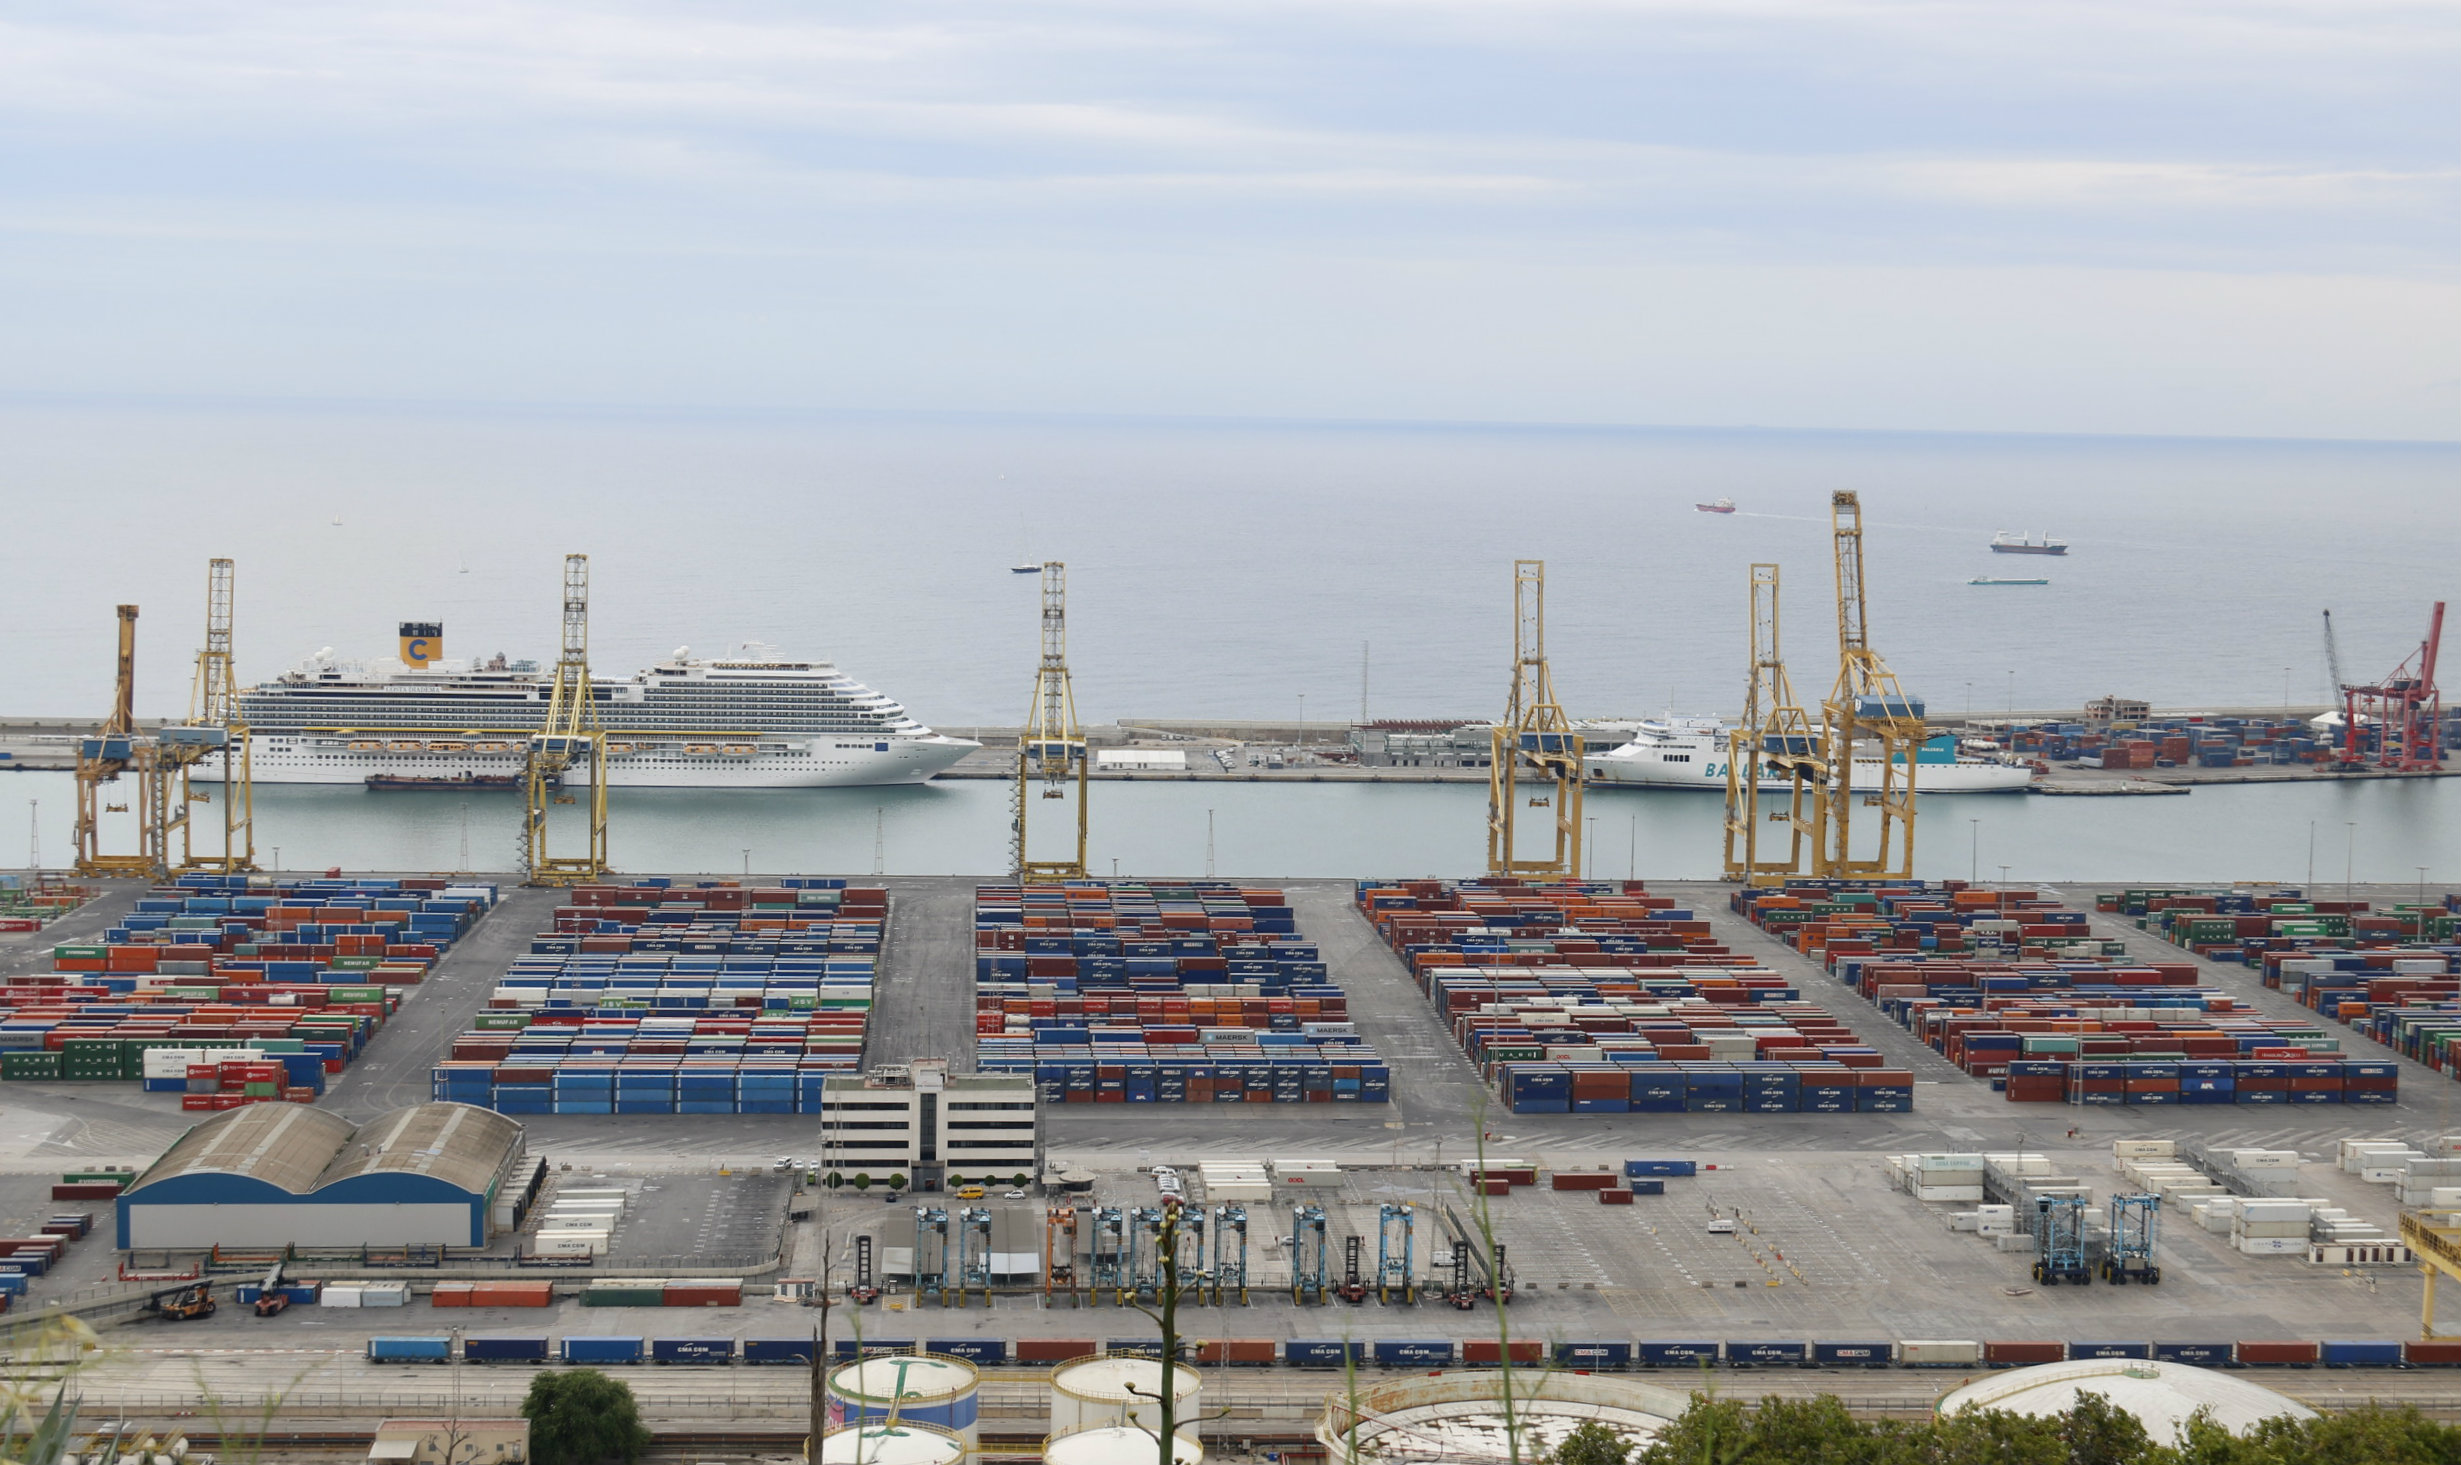 Containers and cranes at the Port of Barcelona (by ACN)